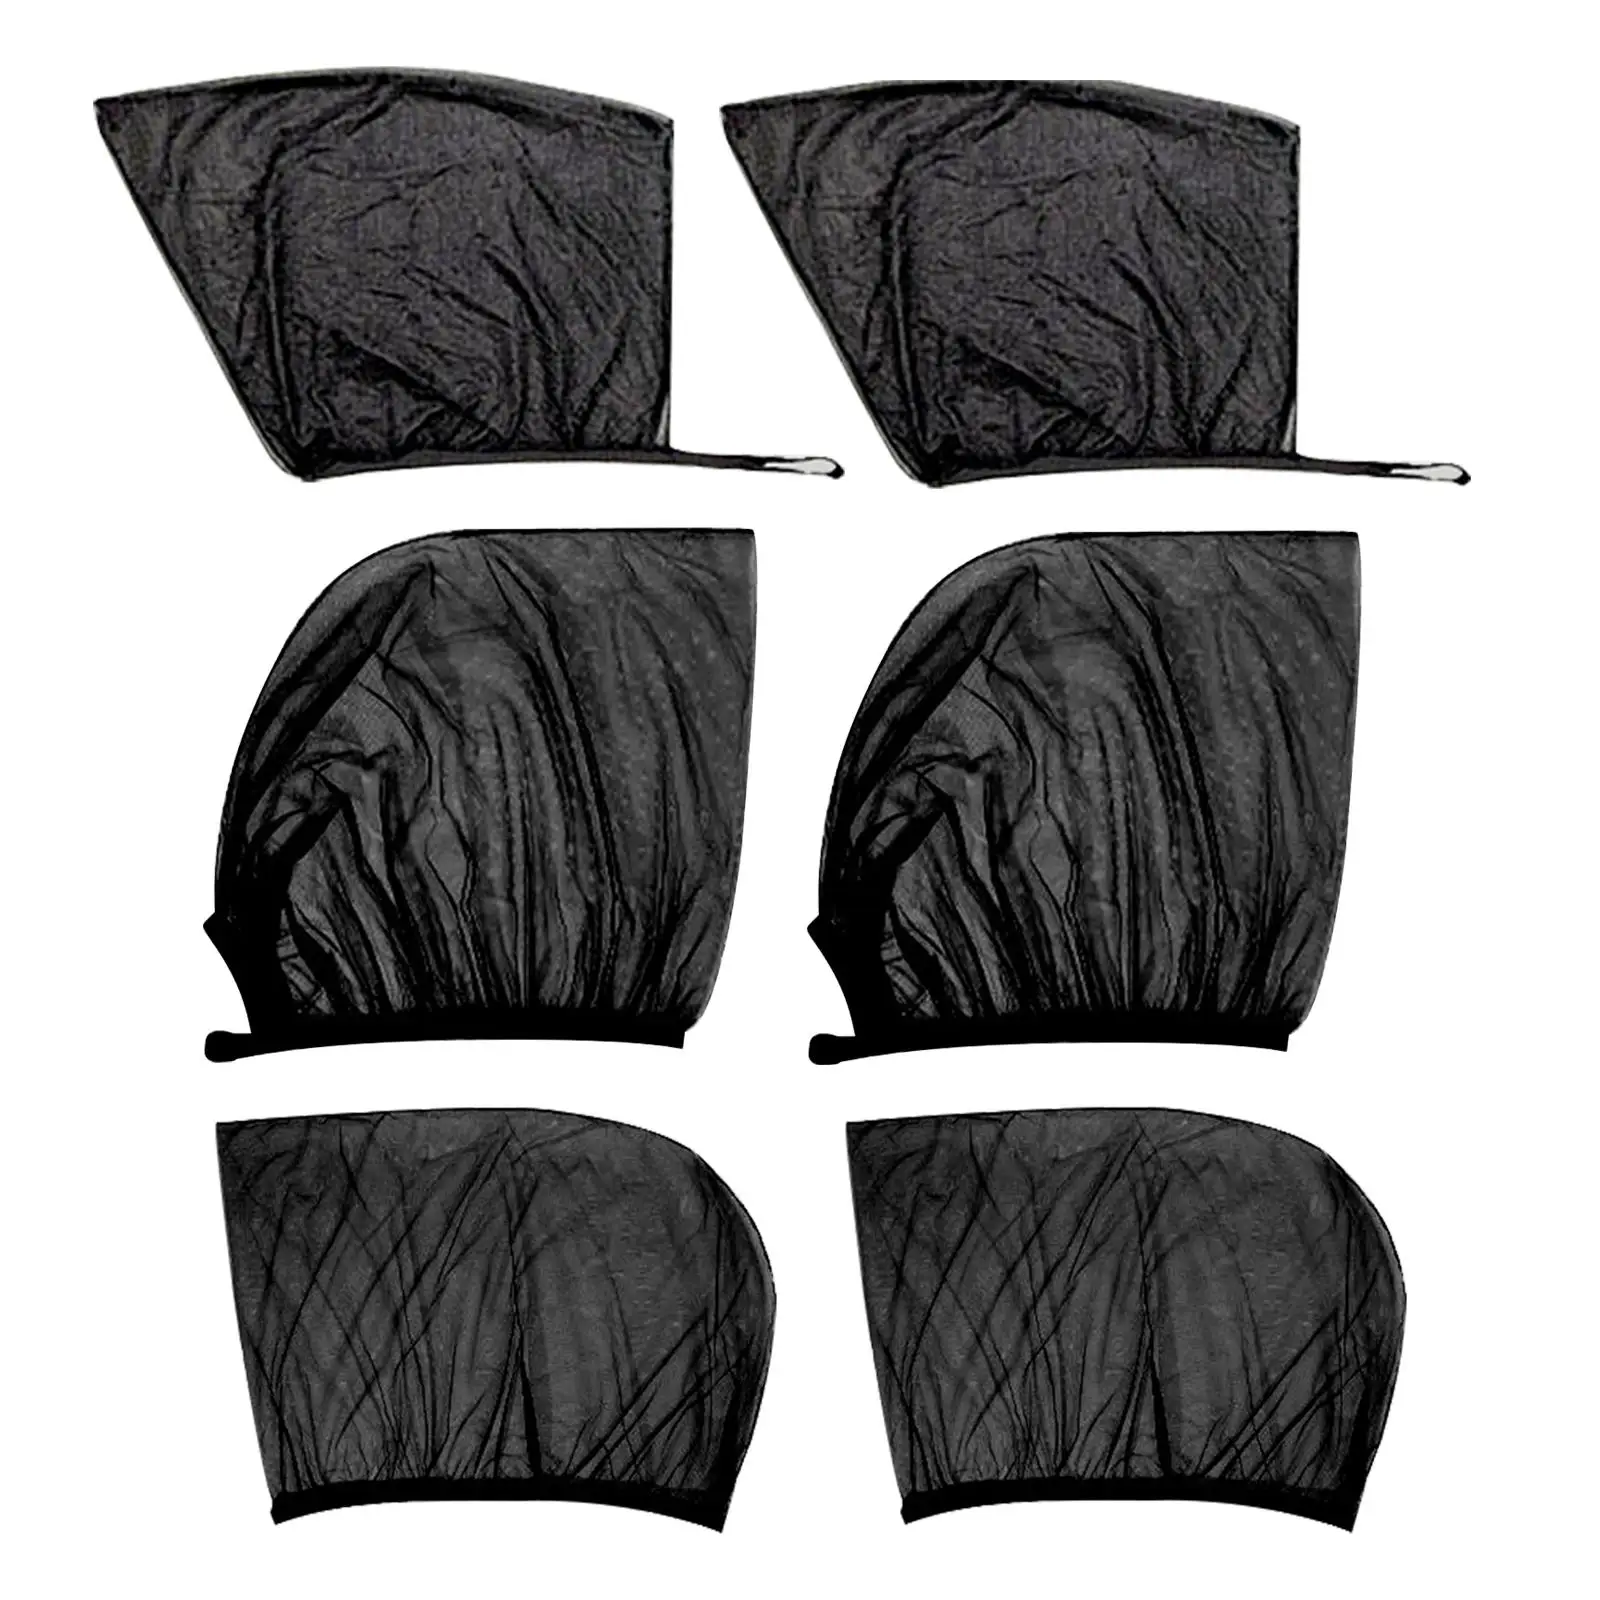 Sunlight Car Window Shades Sun Blocking Stretchy Privacy Protector Foldable Sunshade Keep Passengers, Pets and Car Interior Cool